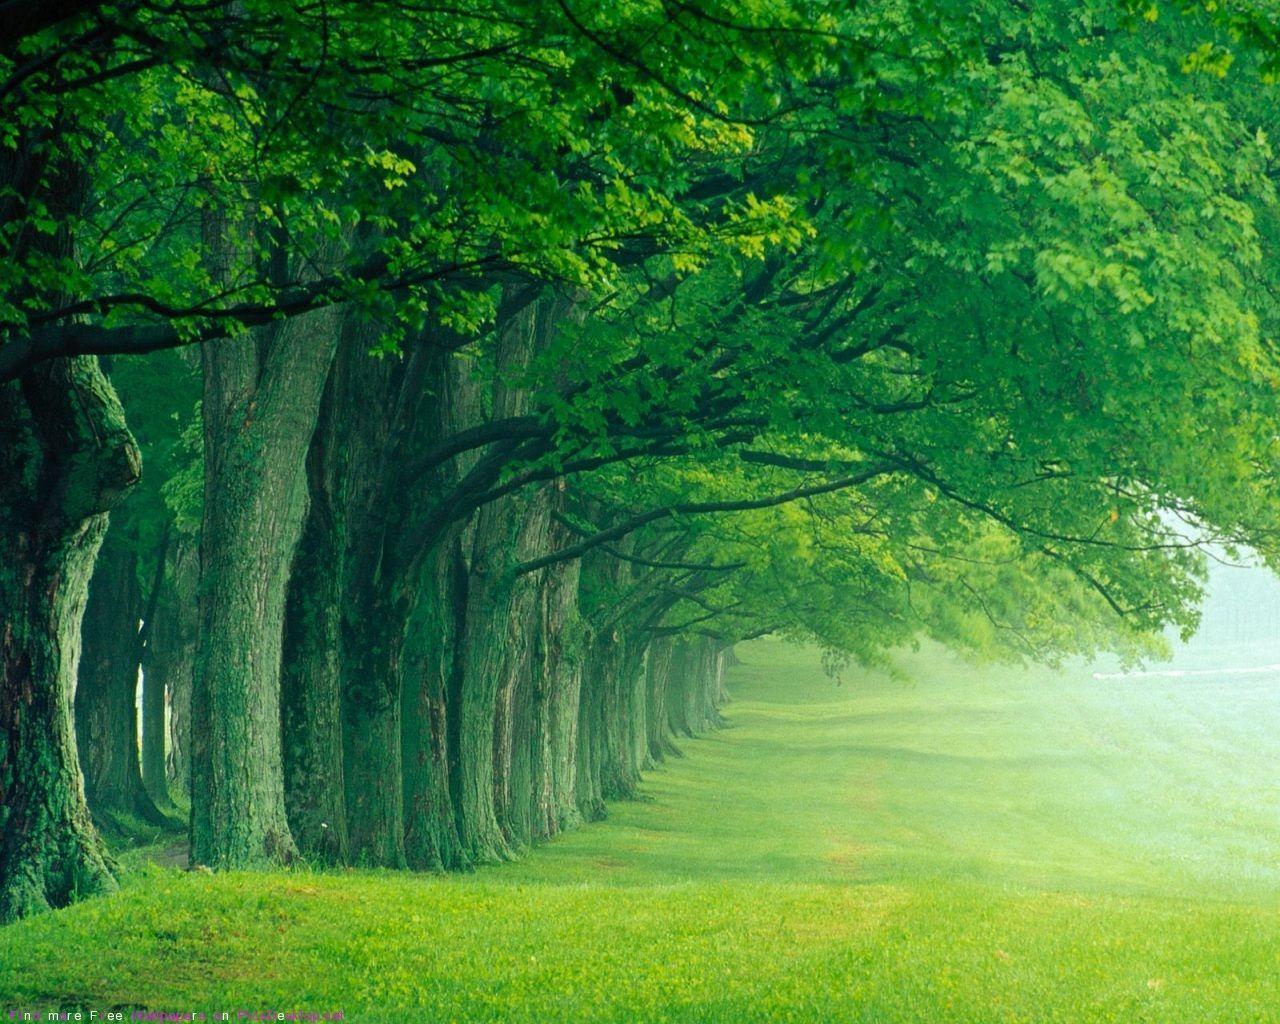 Green Forest Wallpapers - Wallpaper Cave